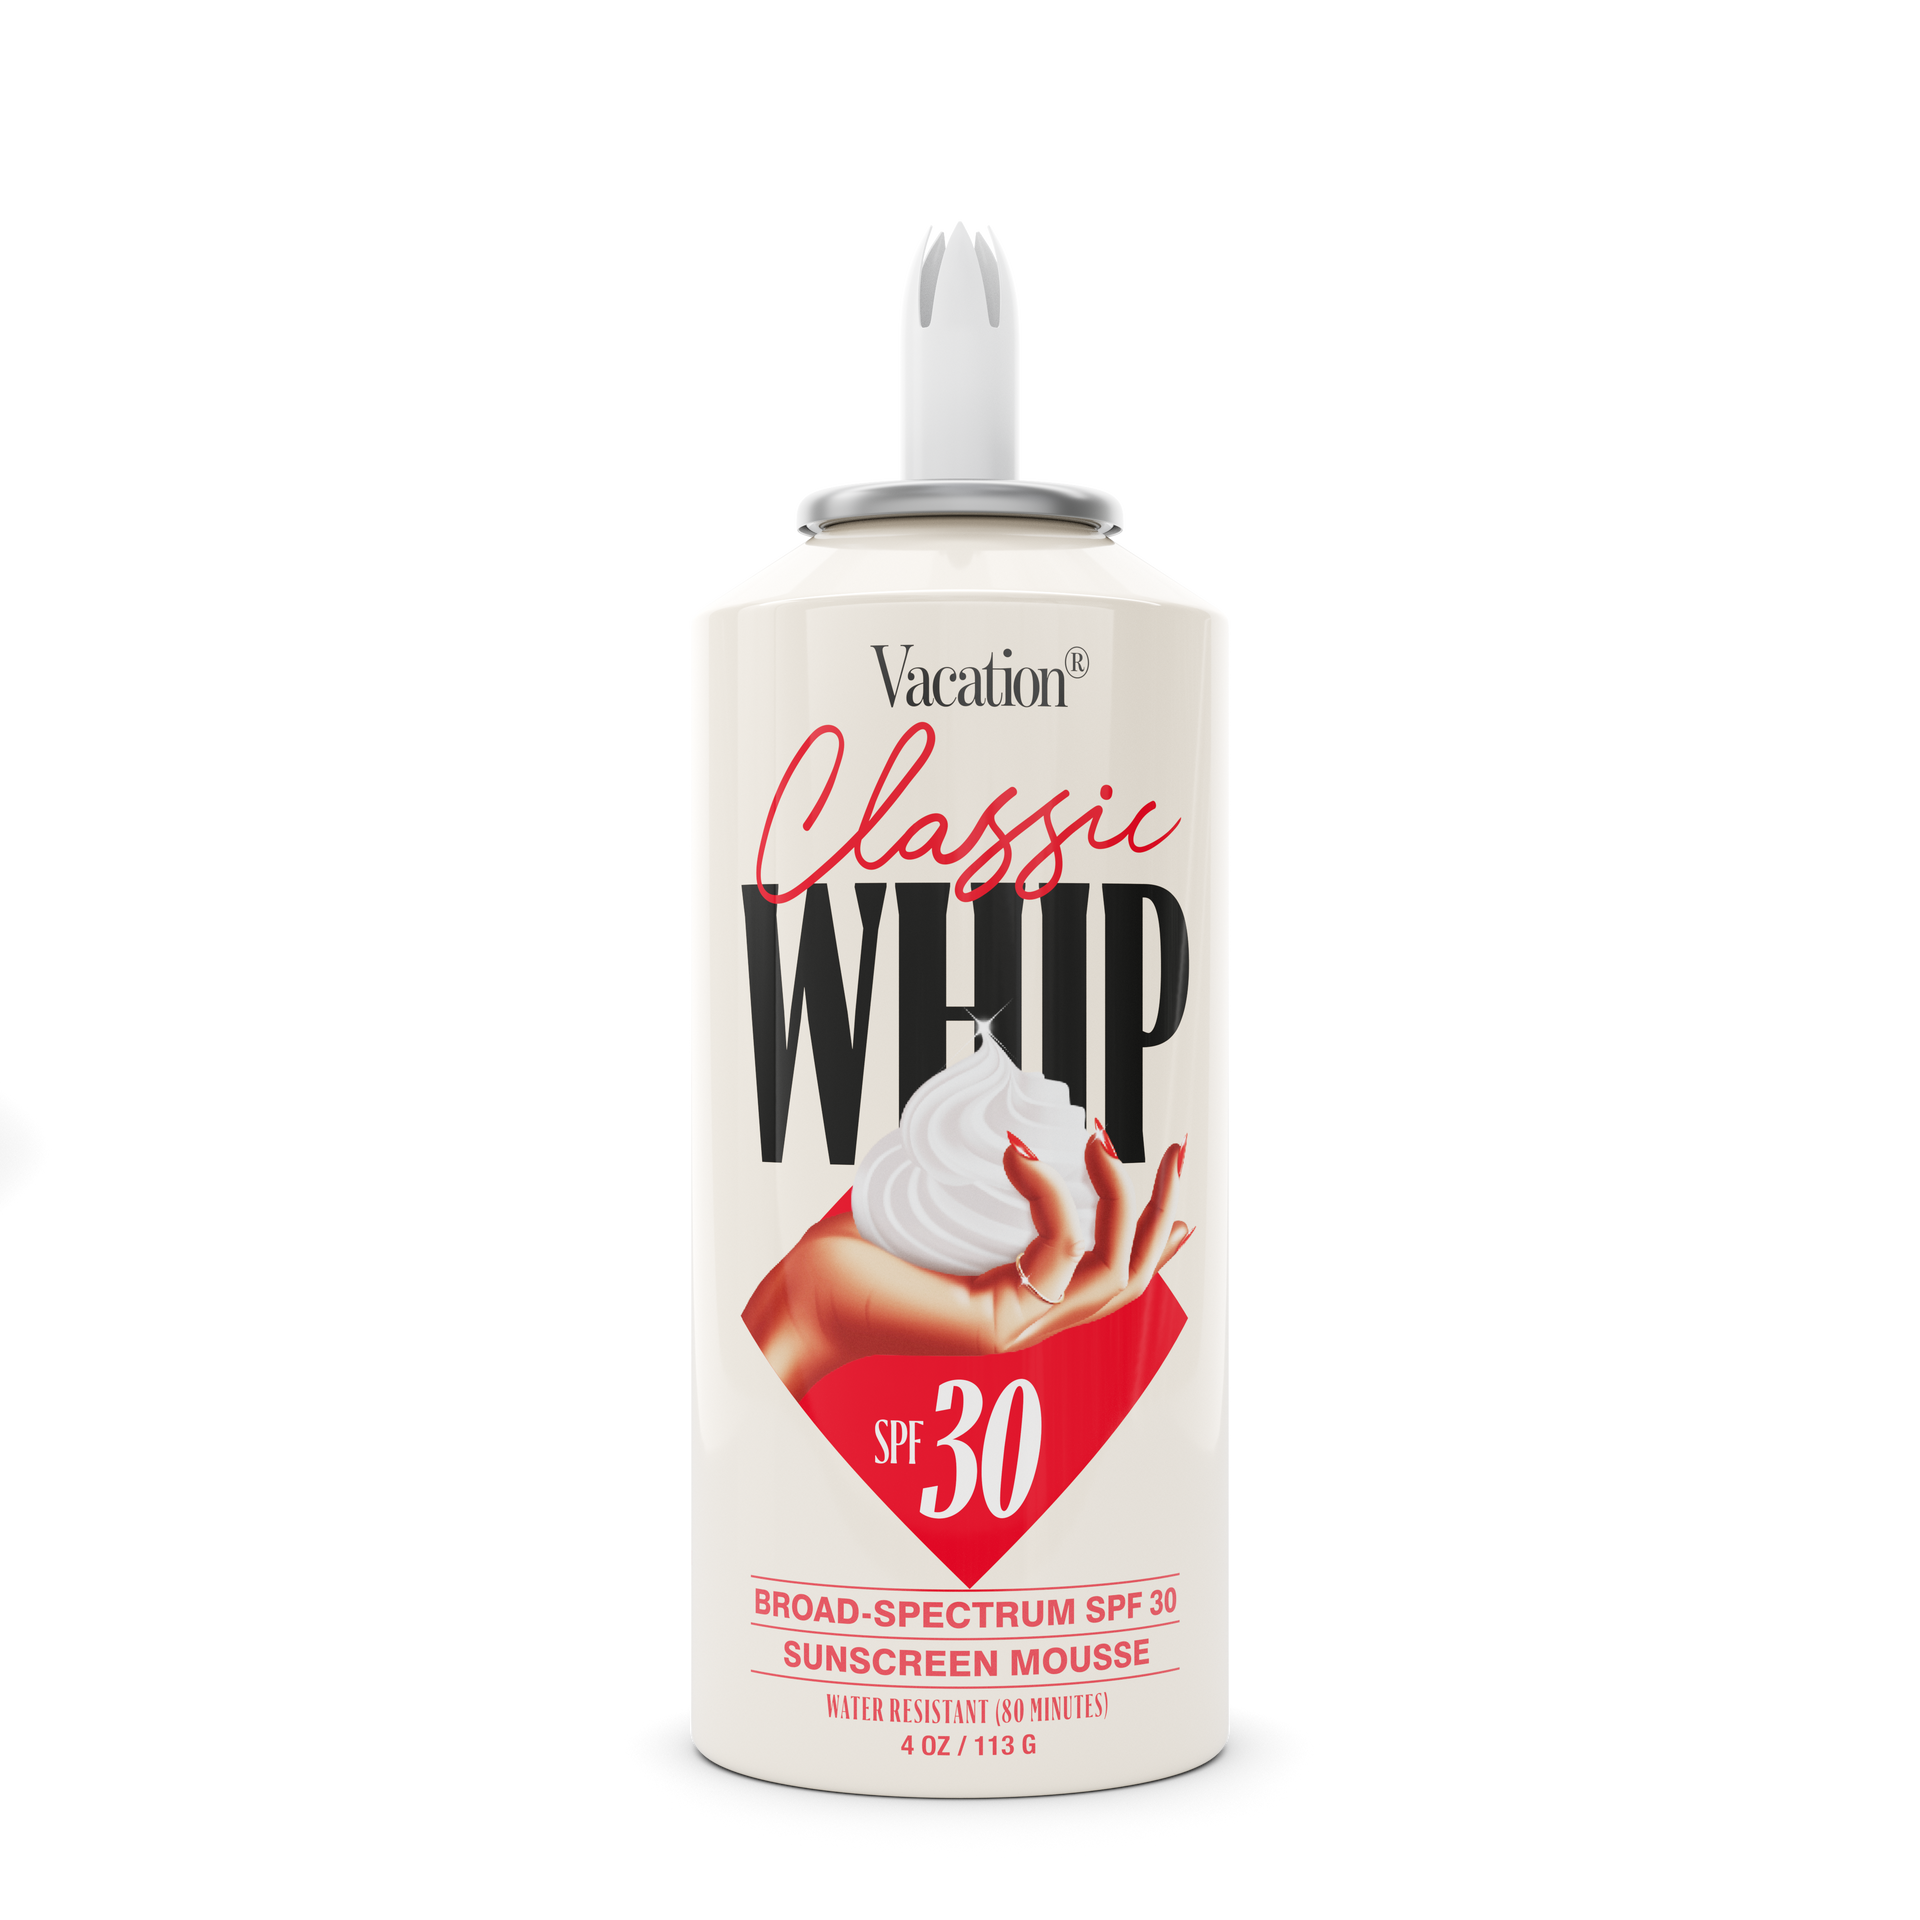 Vacation® Classic Whip SPF 30